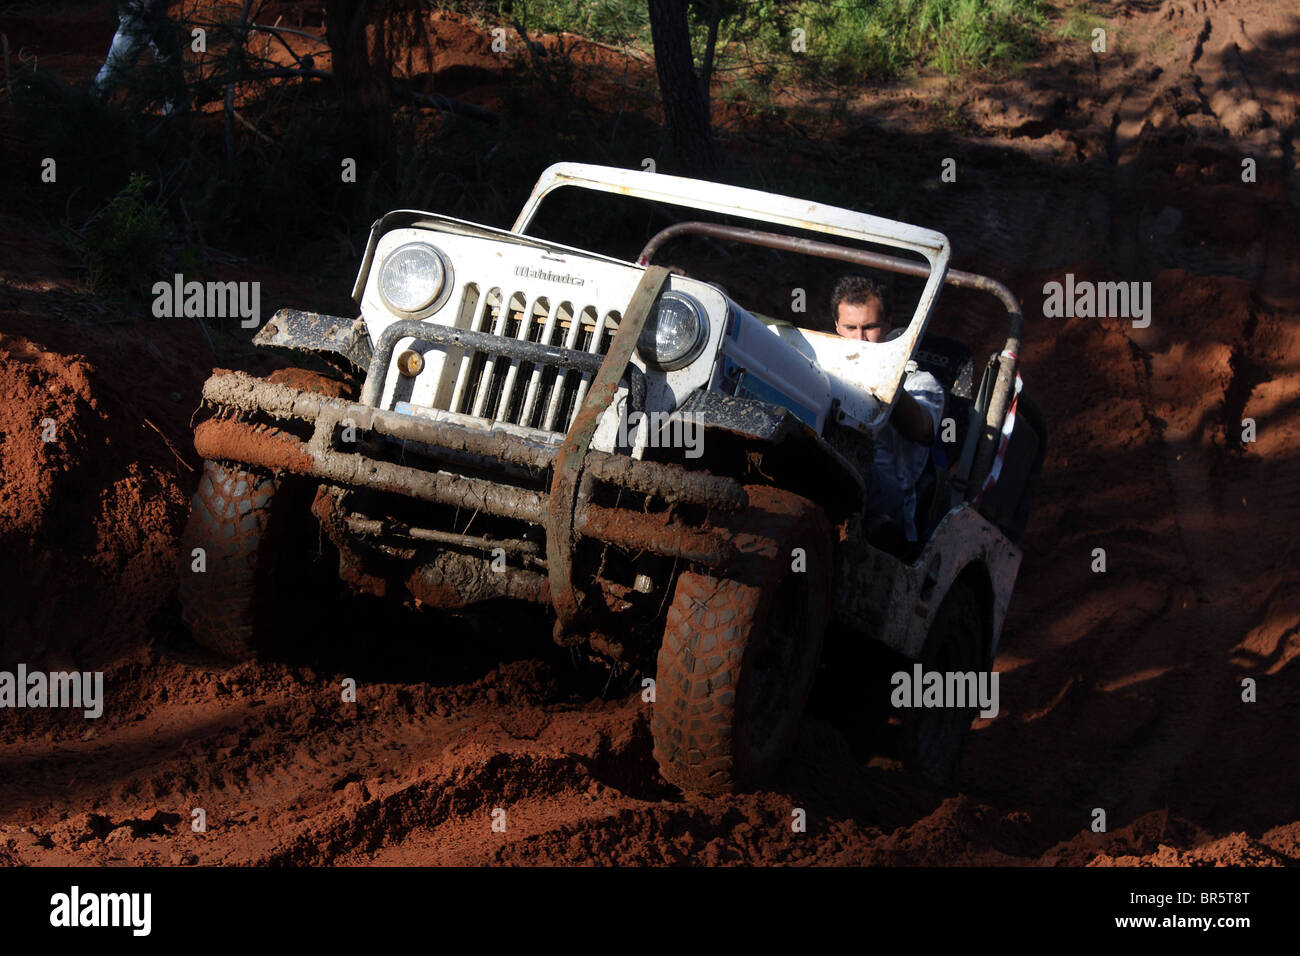 A Mahindra white jeep during an up hill section of an off road rally. Stock Photo